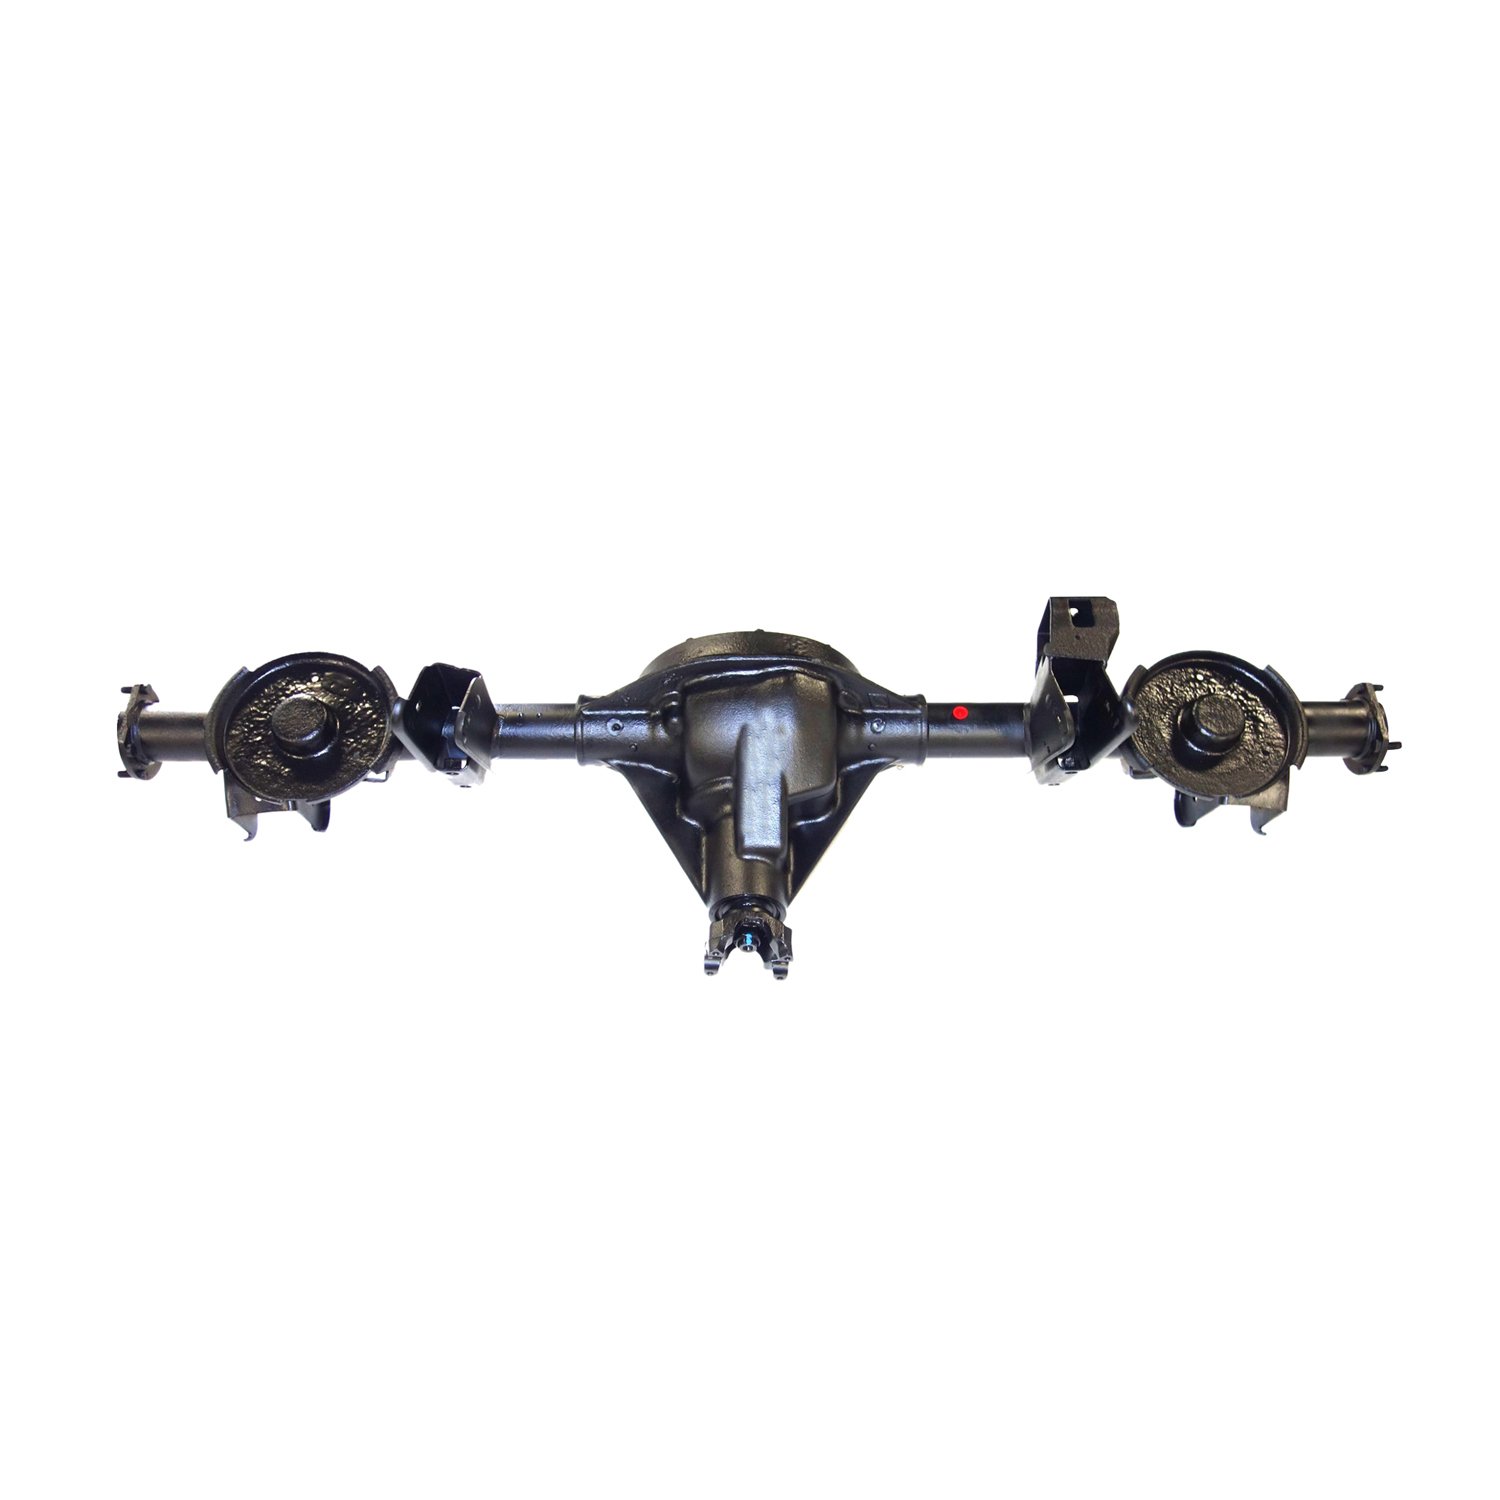 Remanufactured Complete Axle Assy for Dana 35 2002 Liberty 3.73 , 3.7l with ABS, Posi LSD